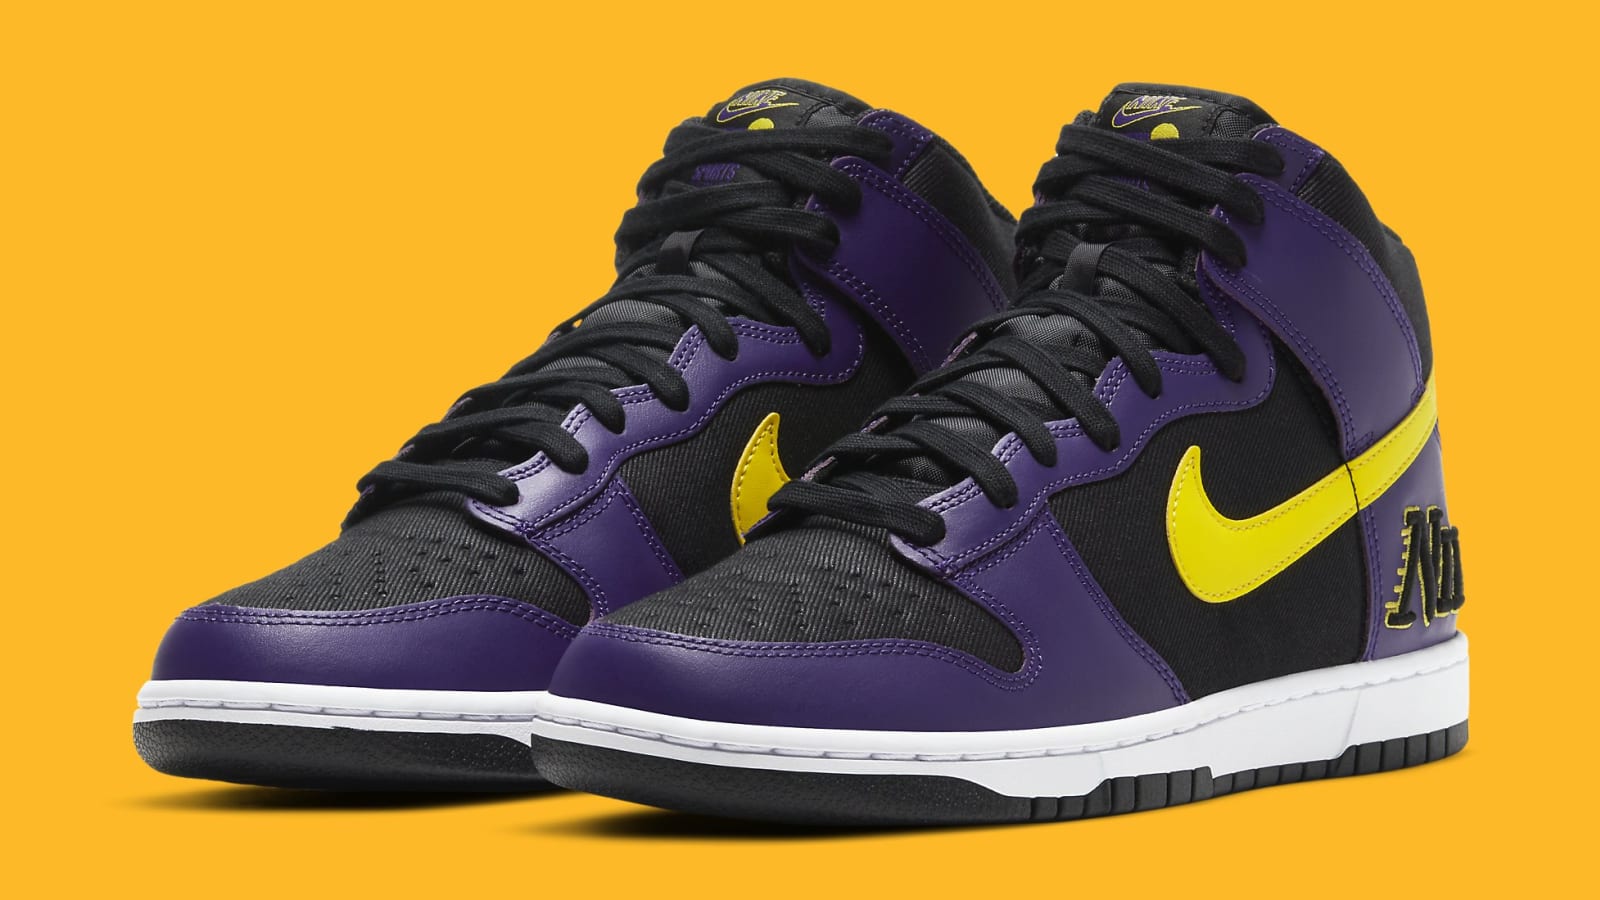 A Lakers-Themed Nike Dunk High Is Releasing Soon